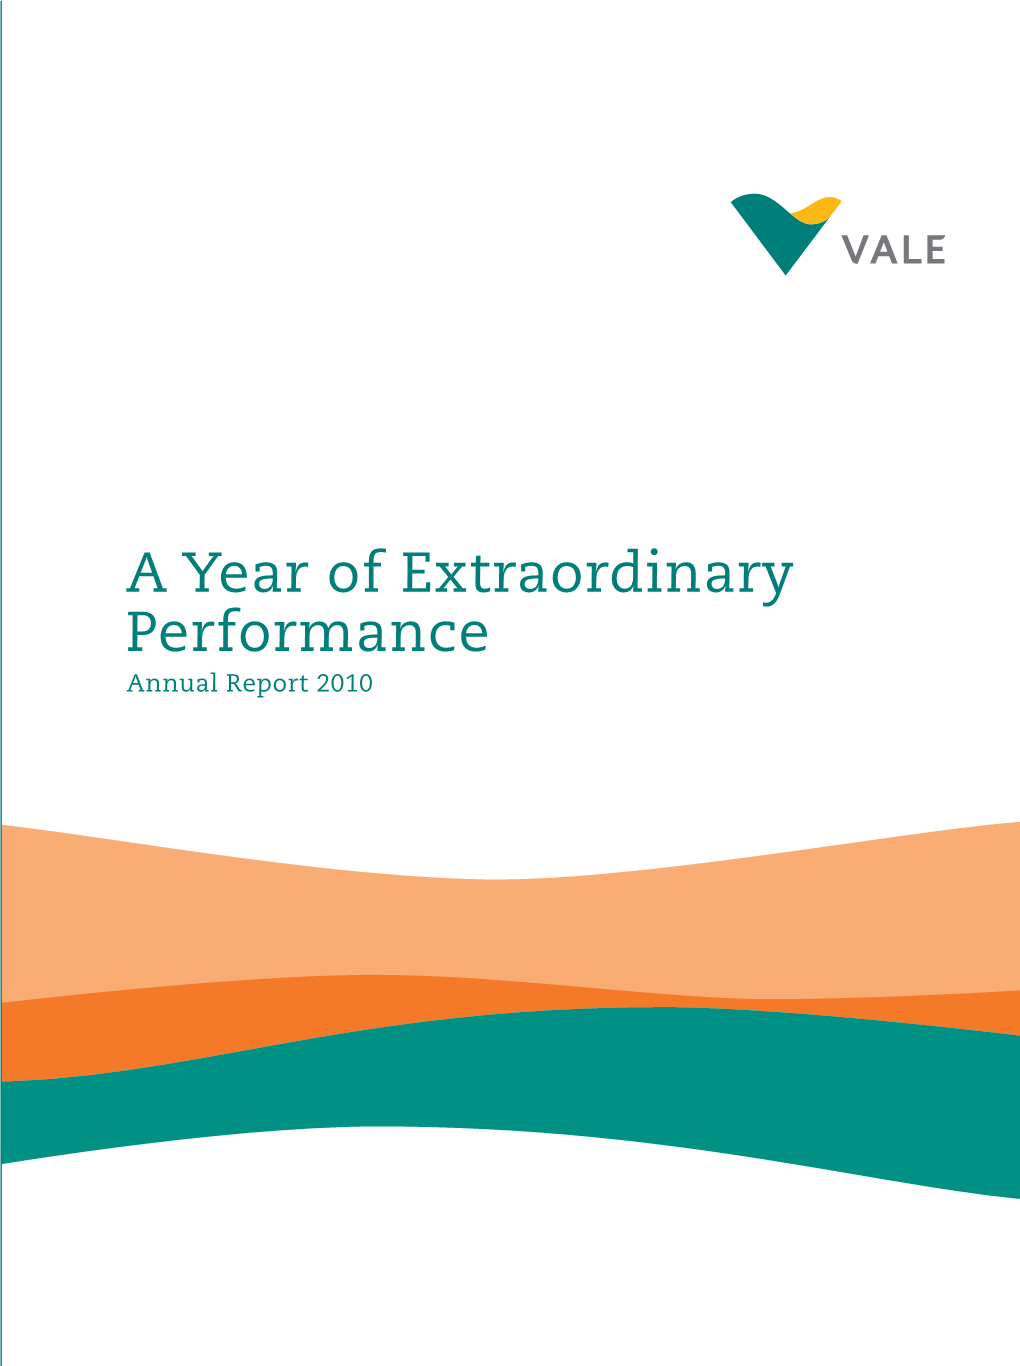 A Year of Extraordinary Performance Annual Report 2010